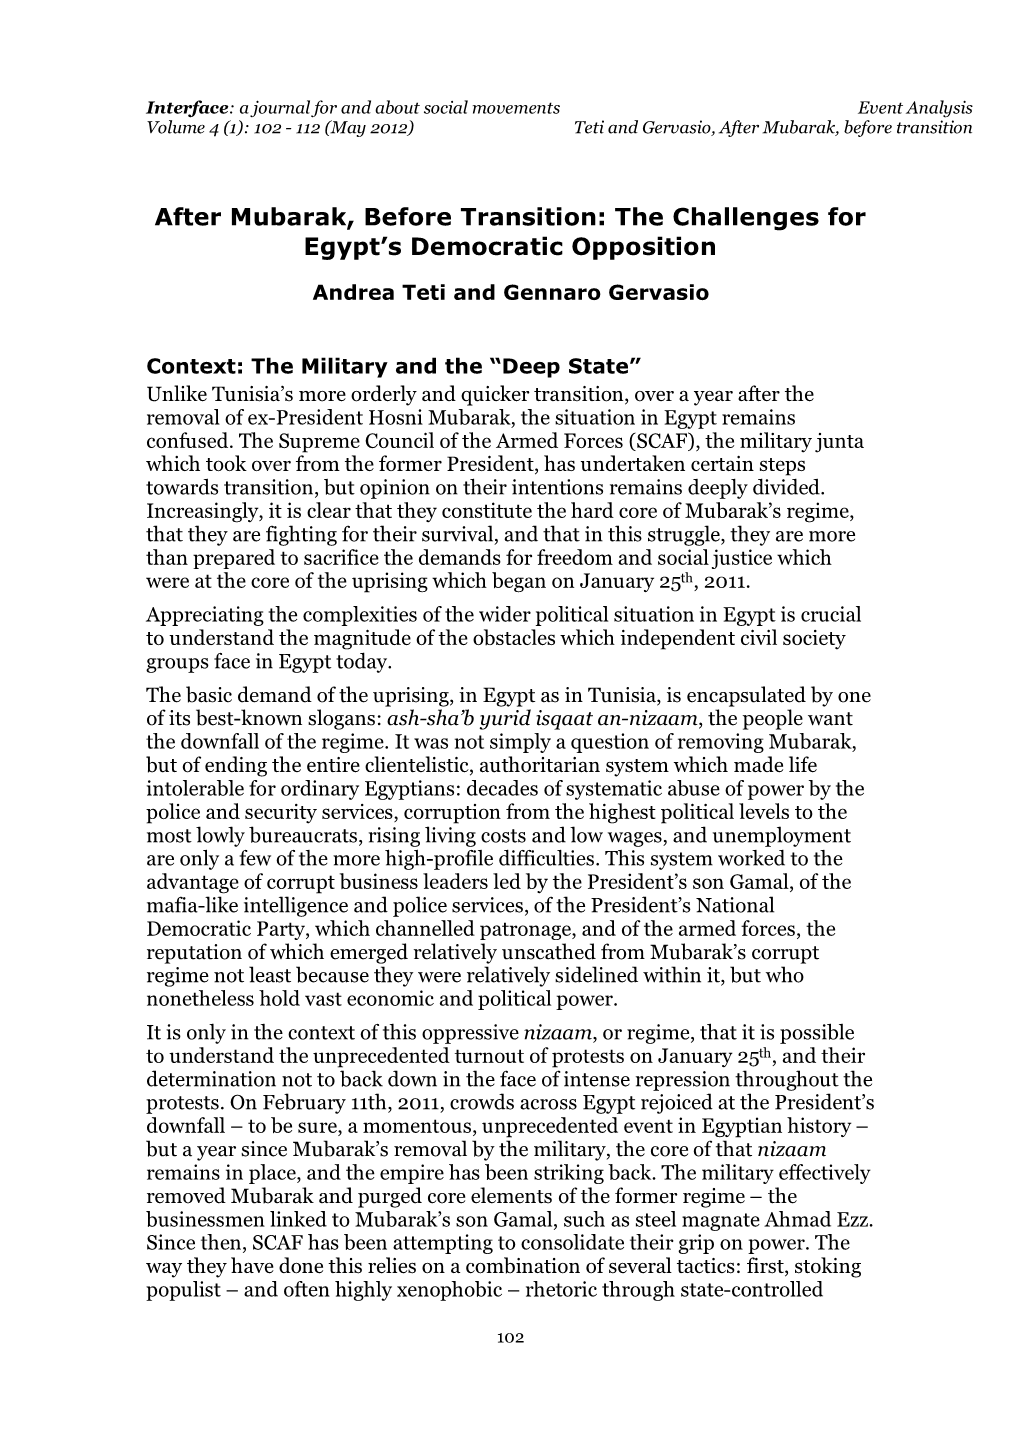 After Mubarak, Before Transition: the Challenges for Egypt’S Democratic Opposition